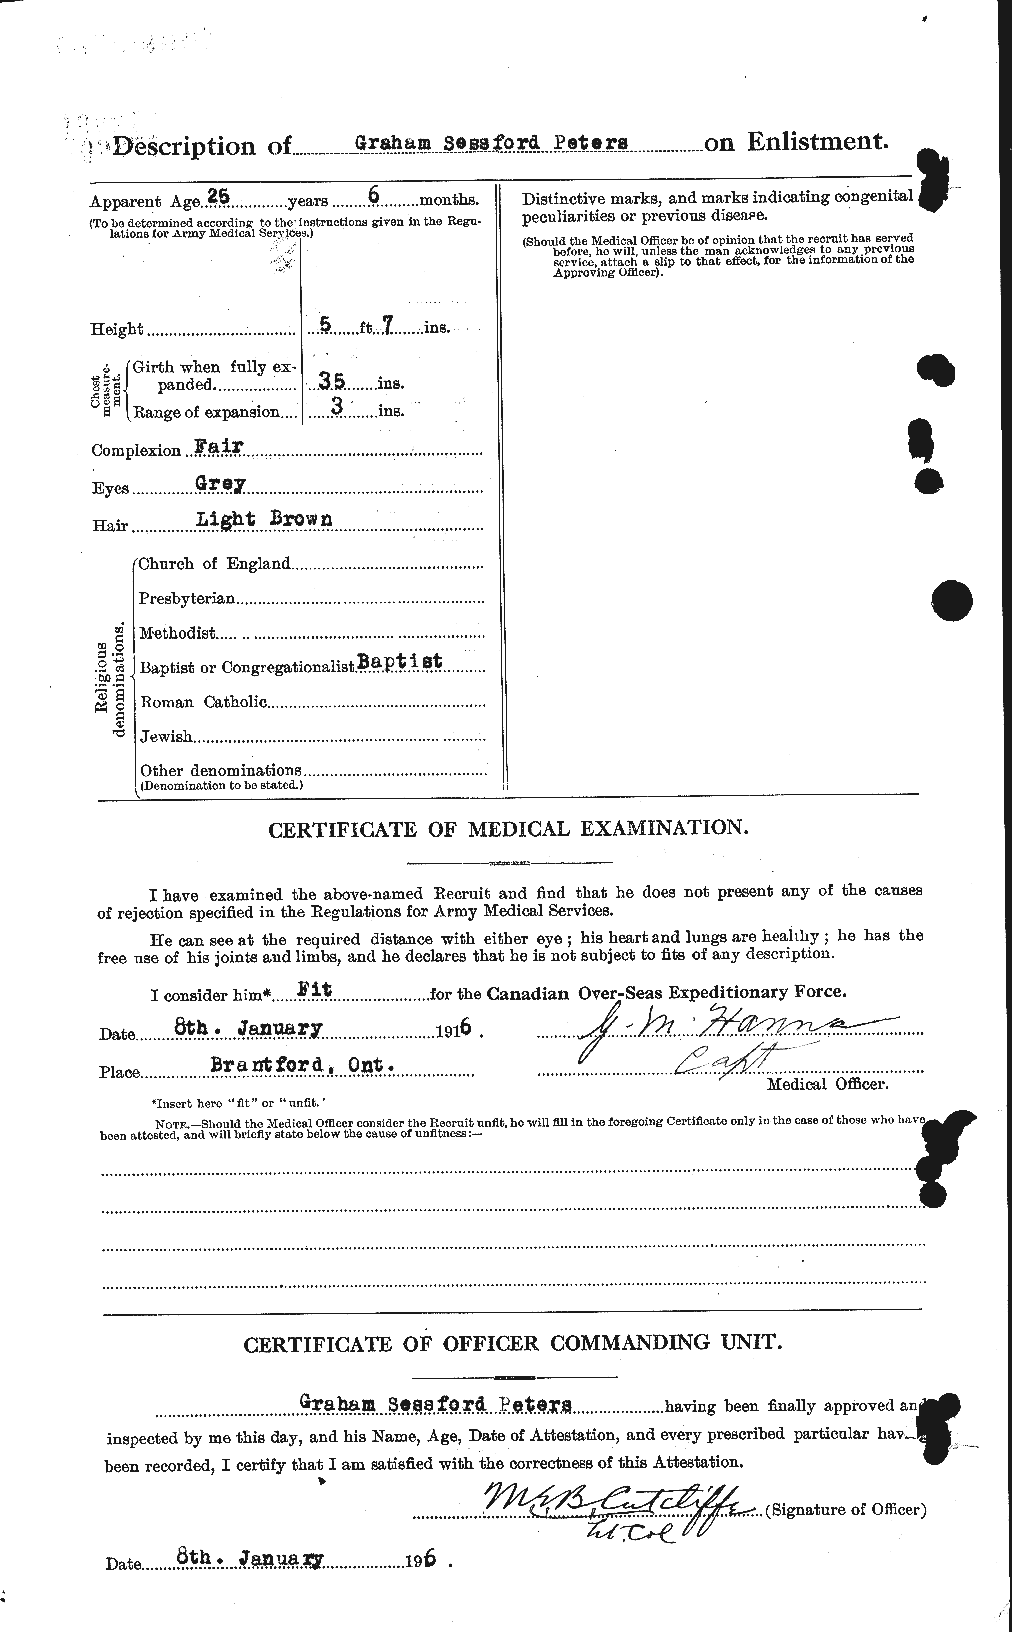 Personnel Records of the First World War - CEF 575471b